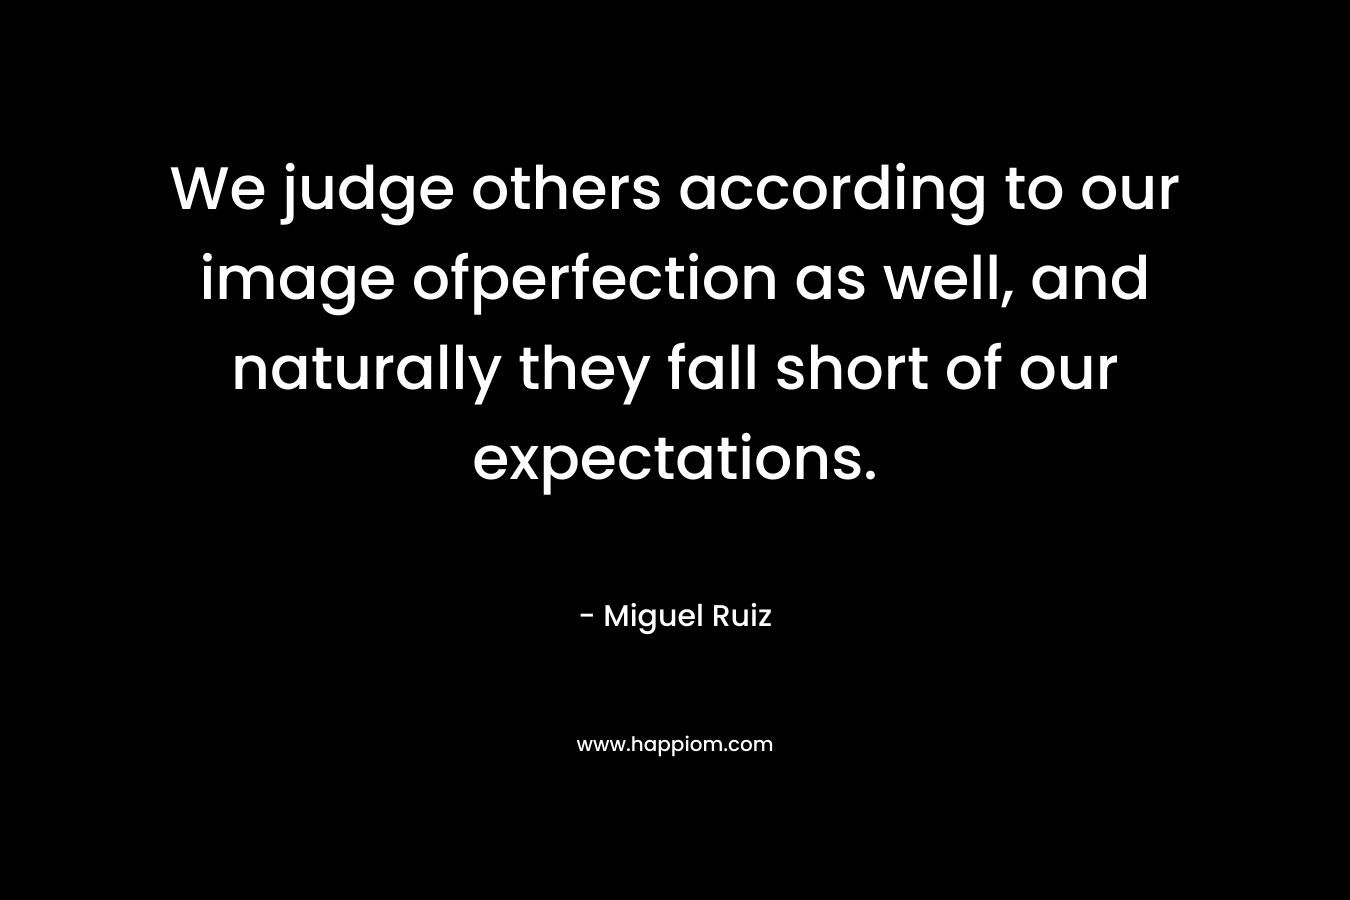 We judge others according to our image ofperfection as well, and naturally they fall short of our expectations.